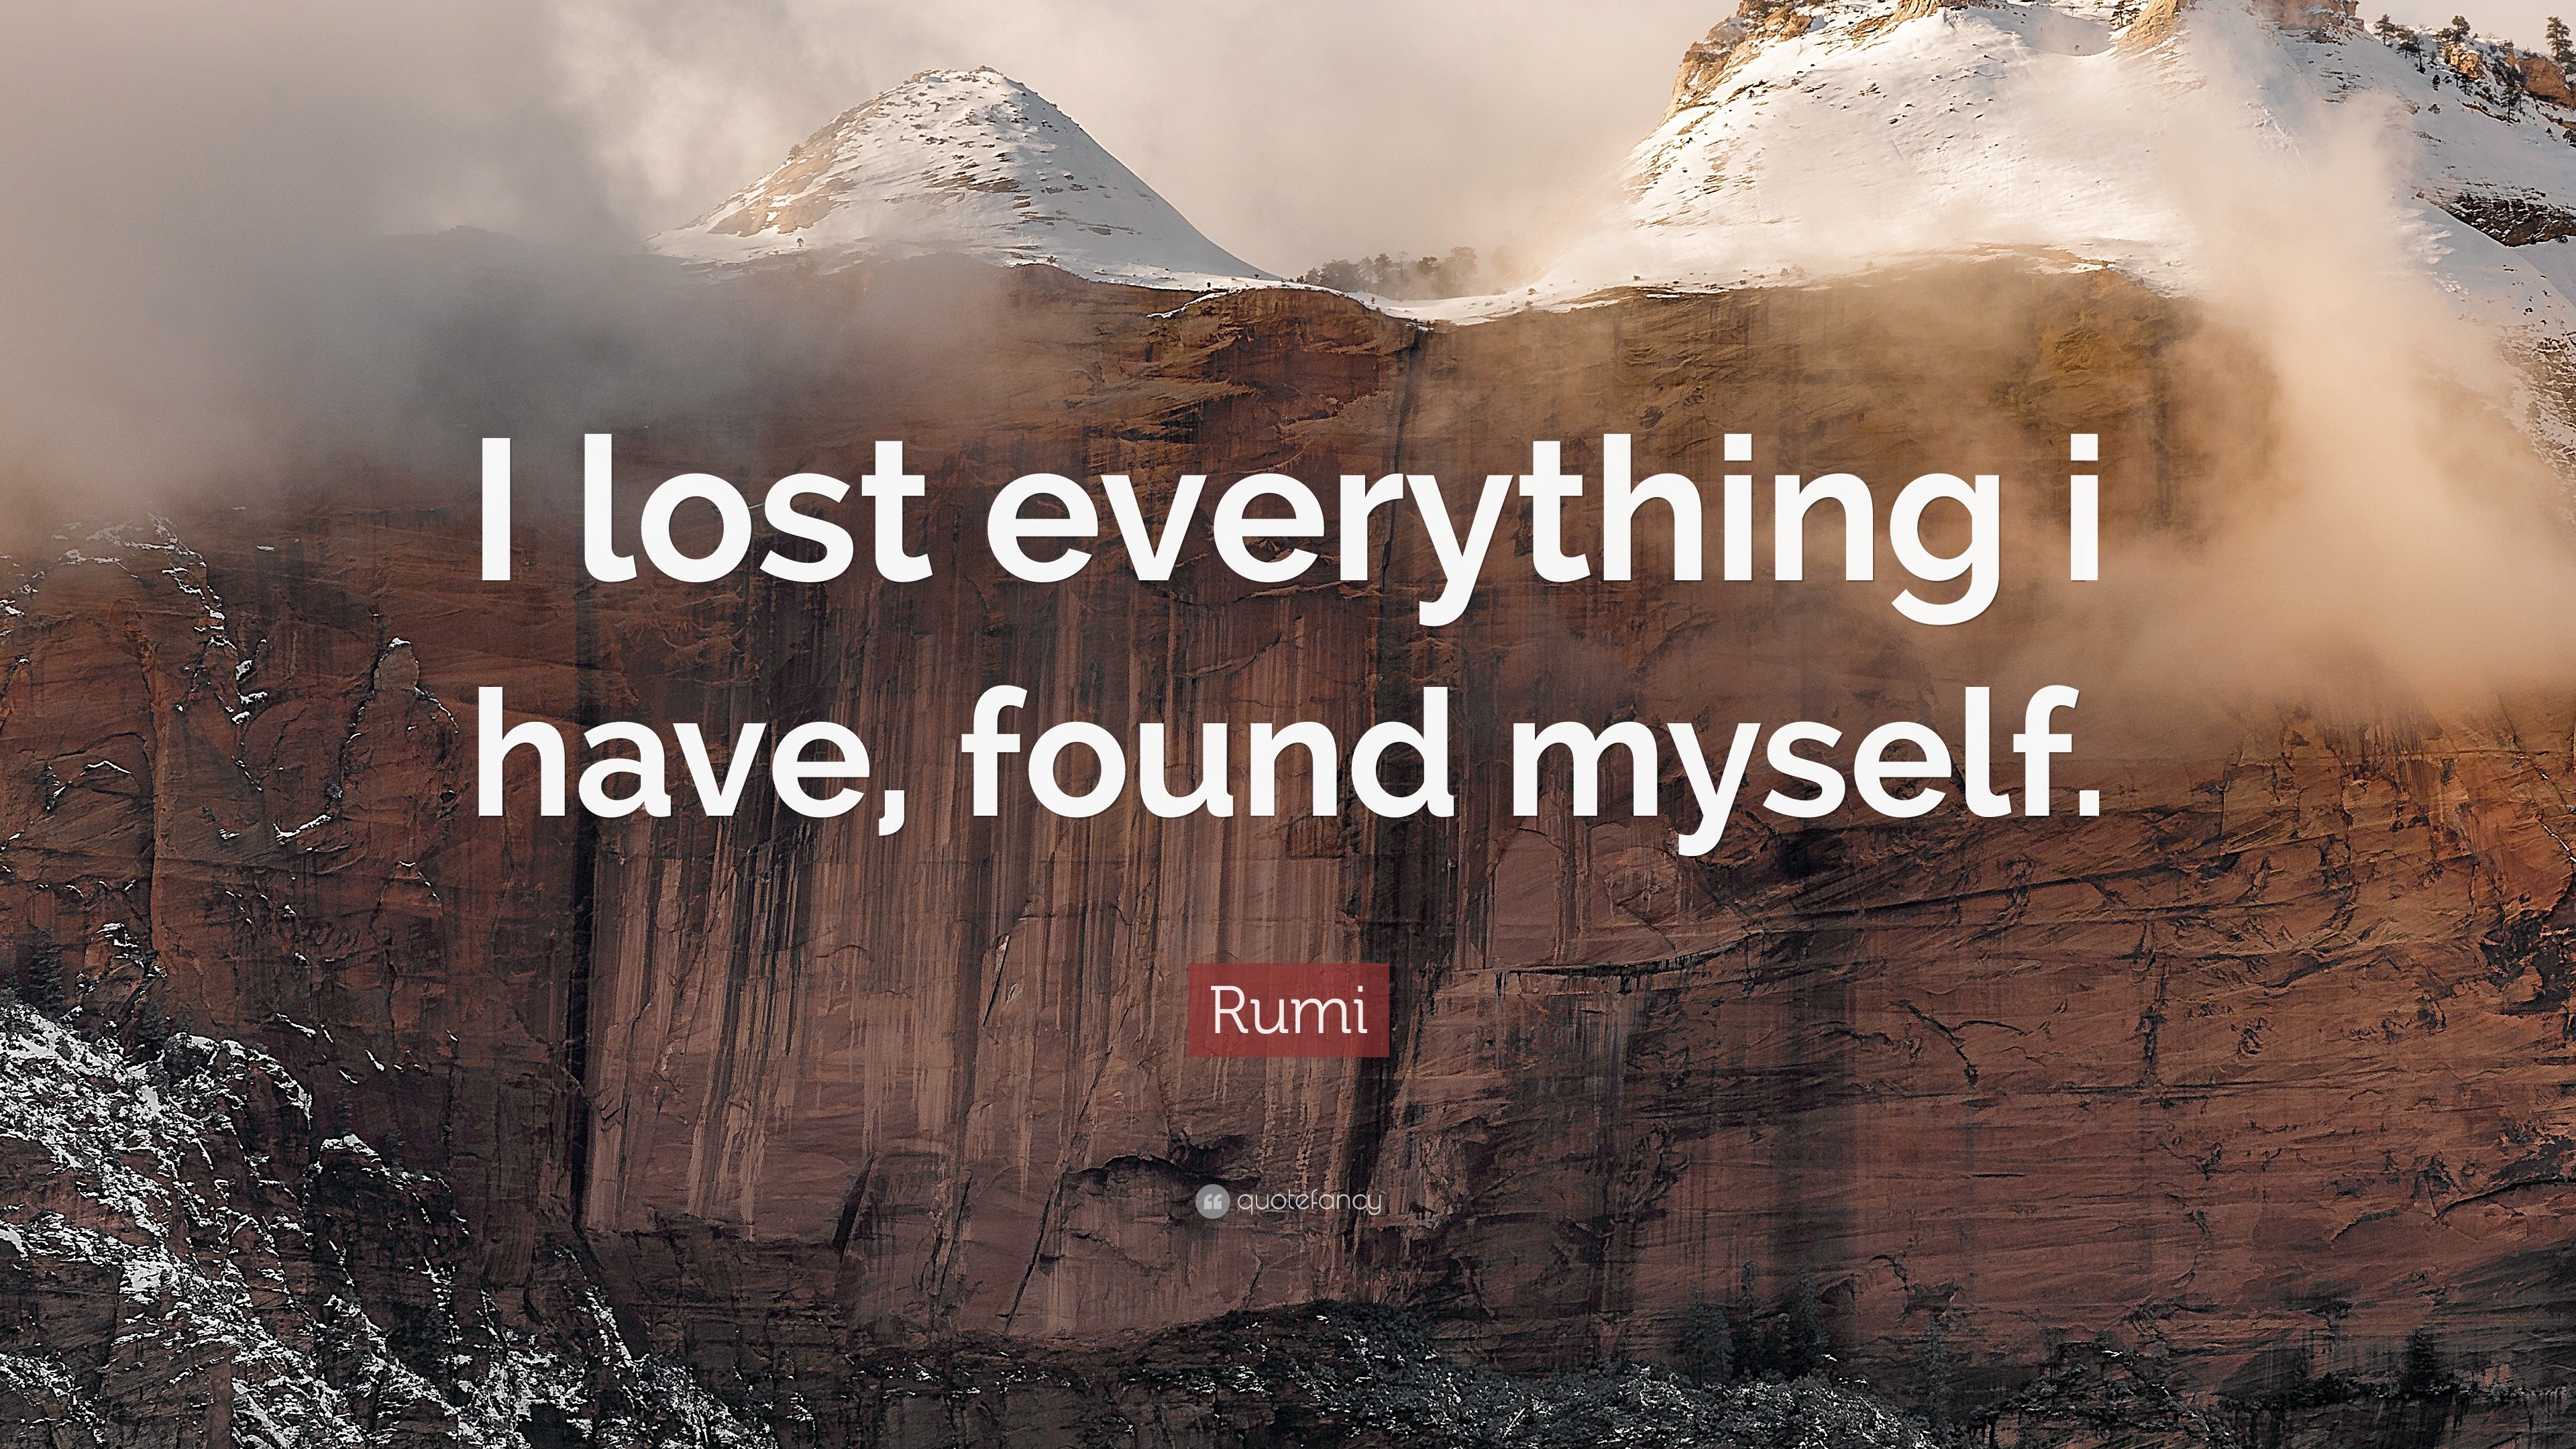 Rumi Quote: "I lost everything i have, found myself." (12 ...